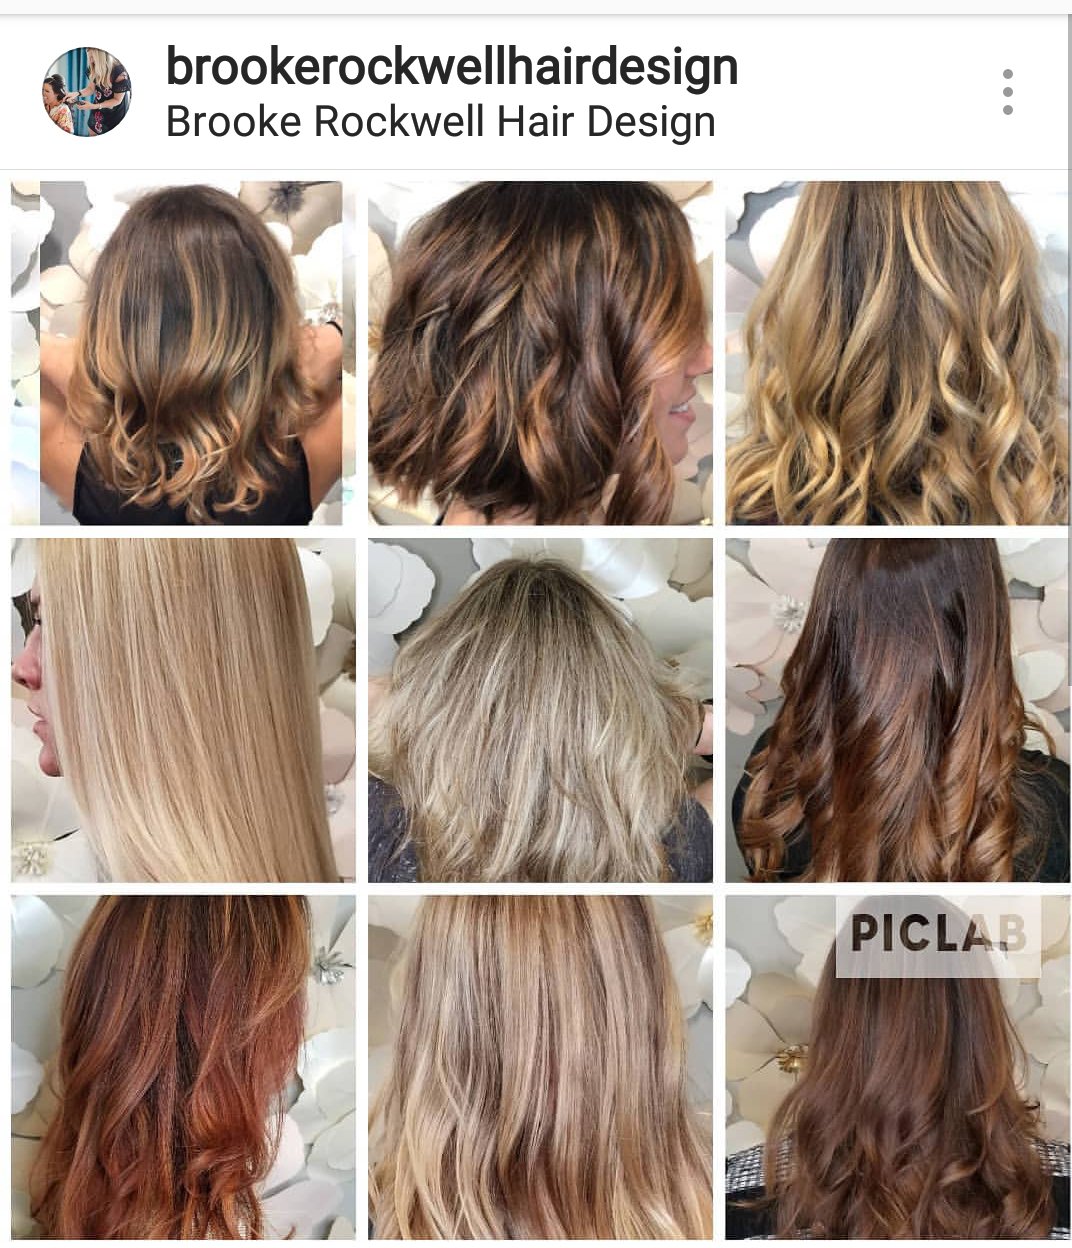 What is a color correction? - Brooke Rockwell Hair Design